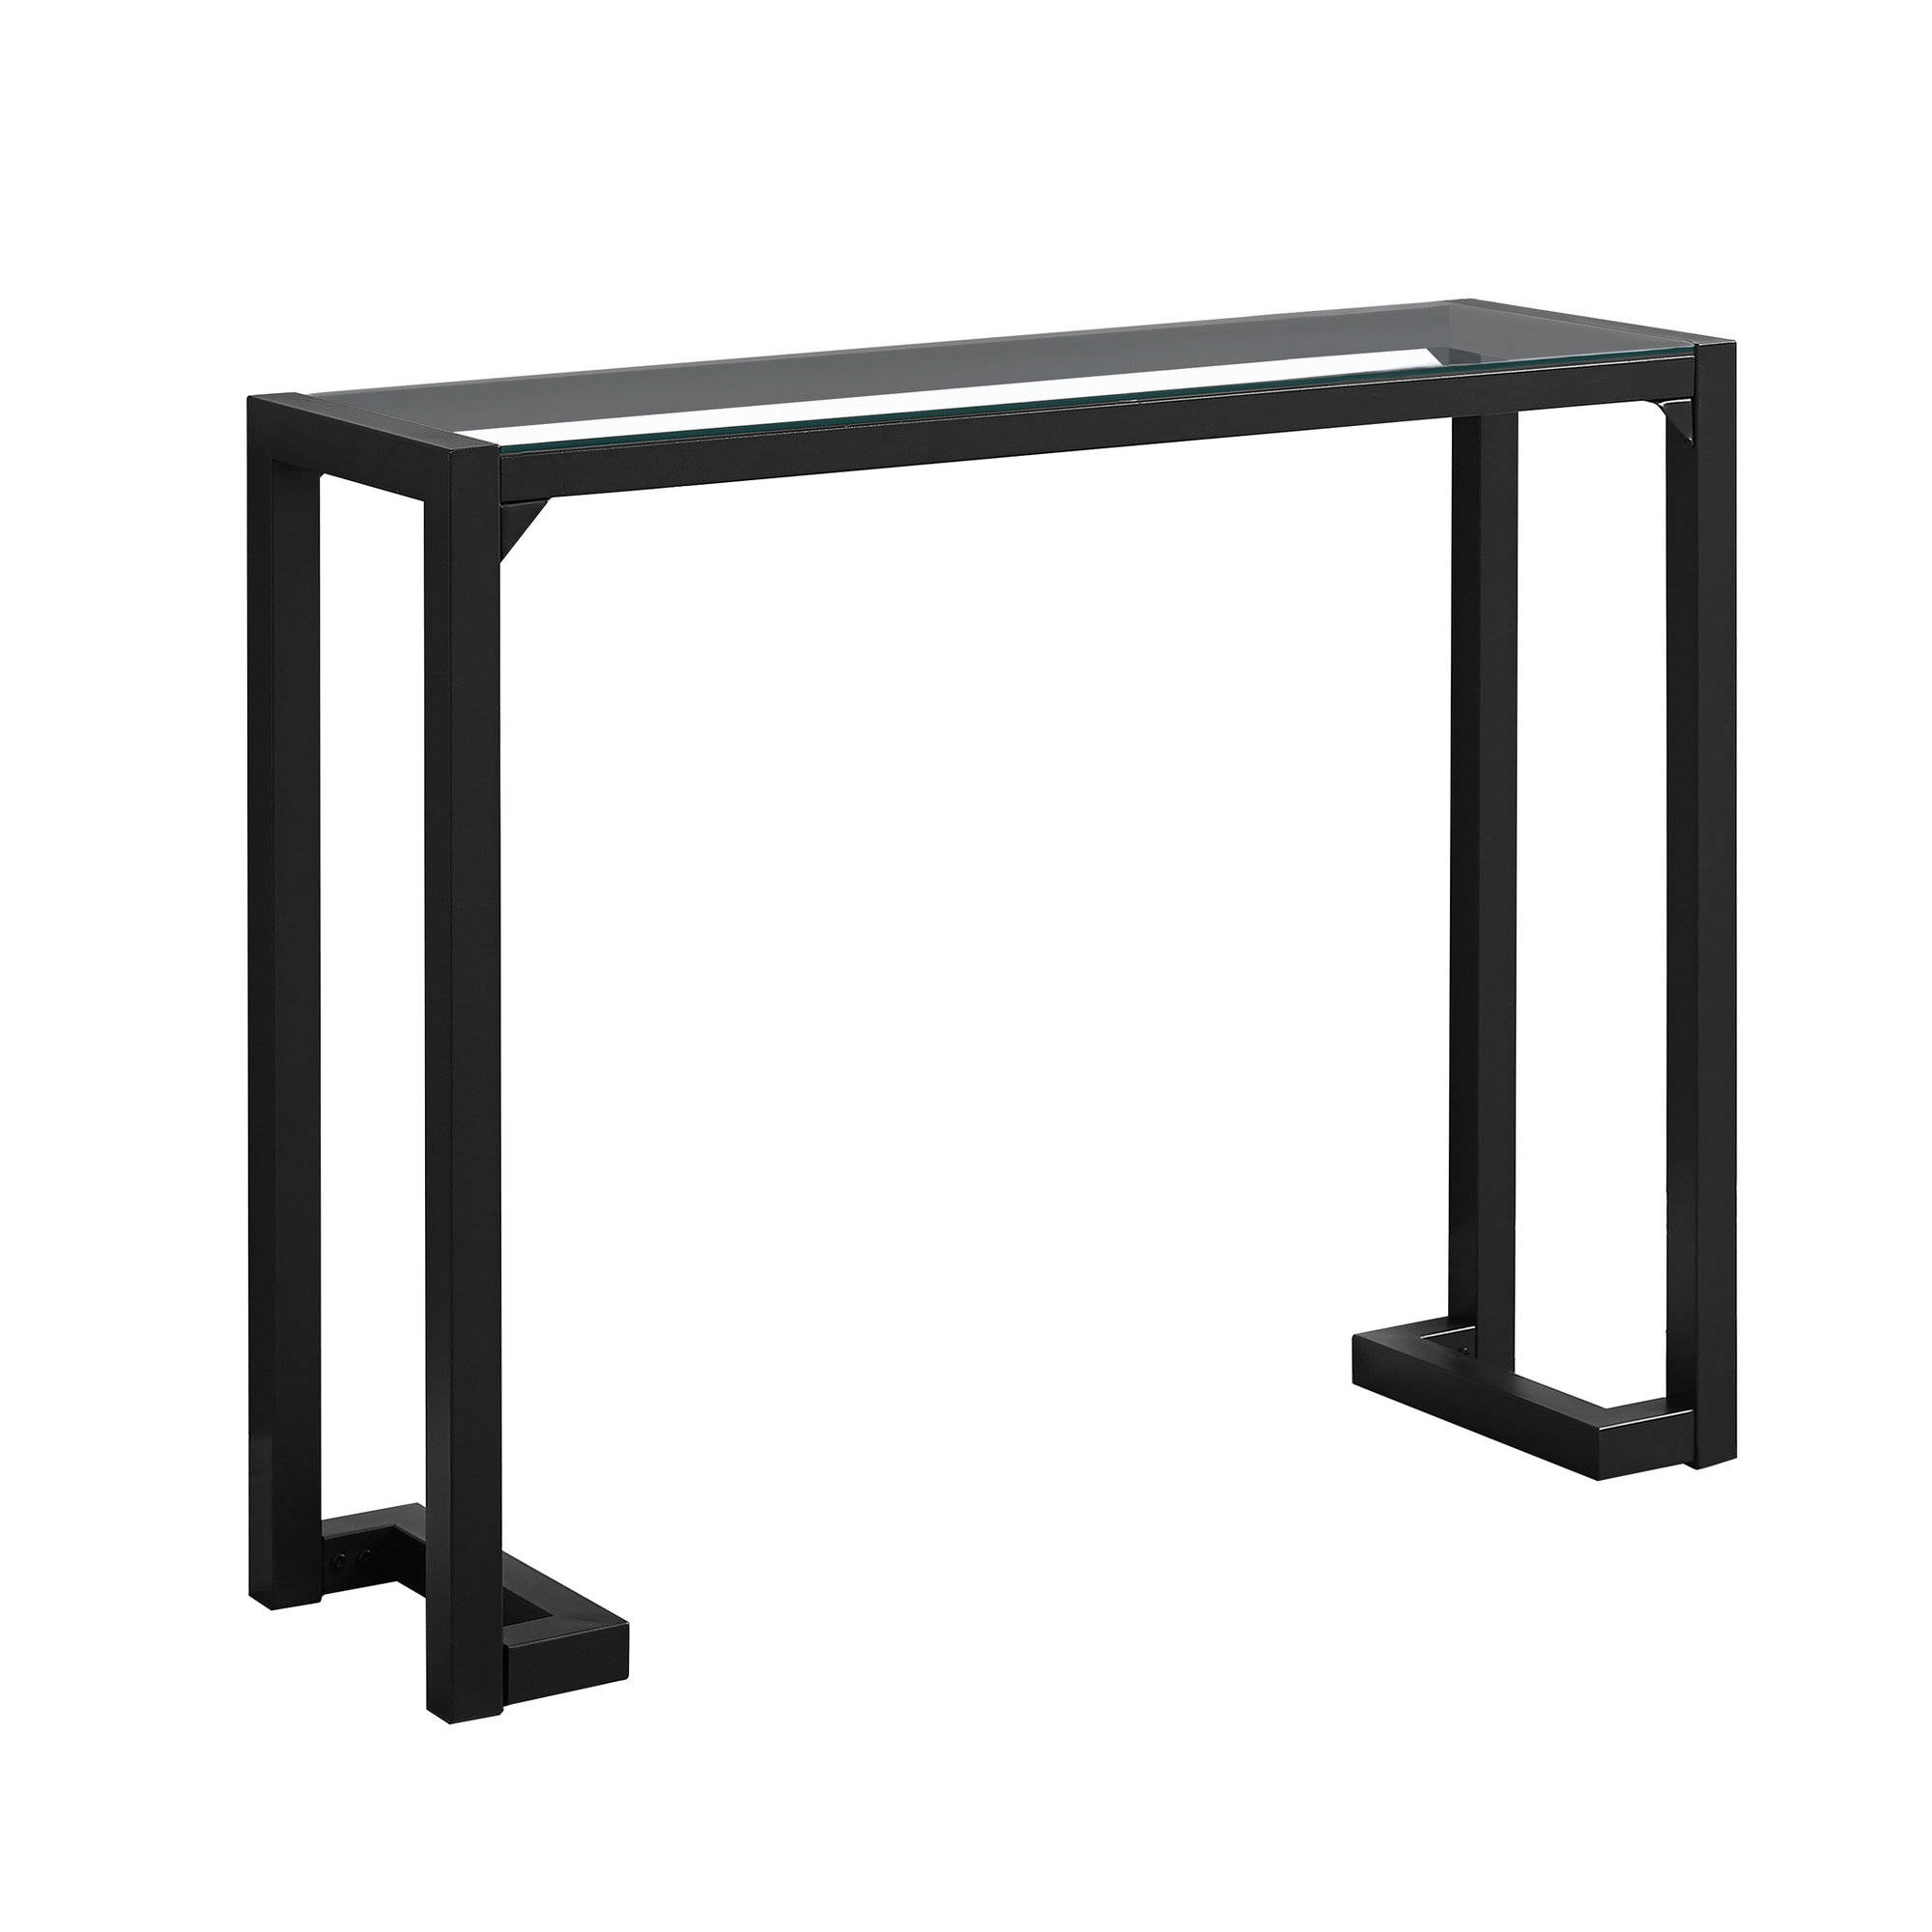 monarch specialties black hall console accent table the classy home mnc target cabinet dale tiffany chandelier tall pedestal pottery barn like dining threshold trim patio garden